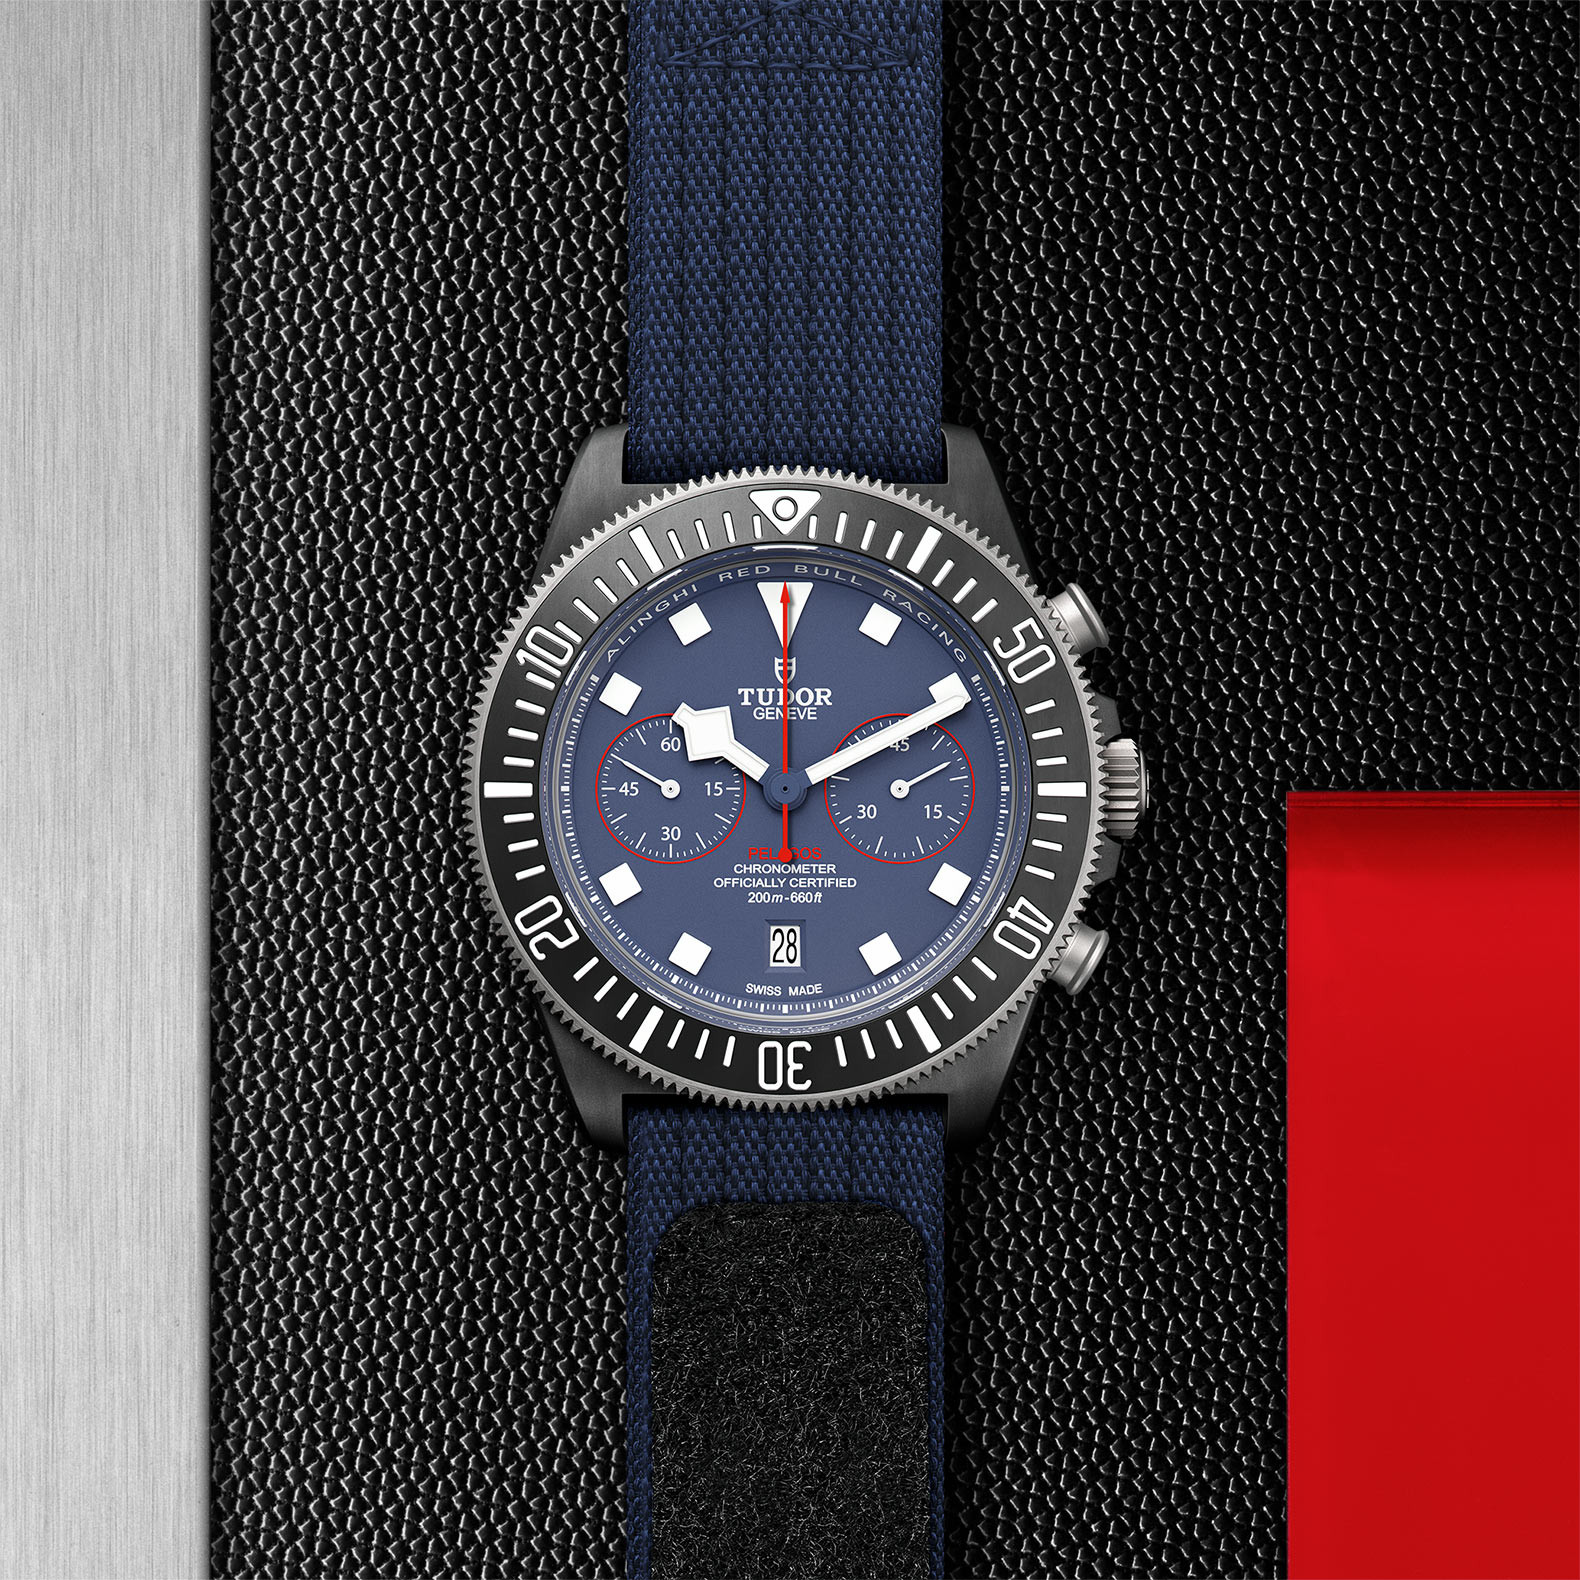 TUDOR Pelagos FXD with 42mm Black Composite Case Laying Down